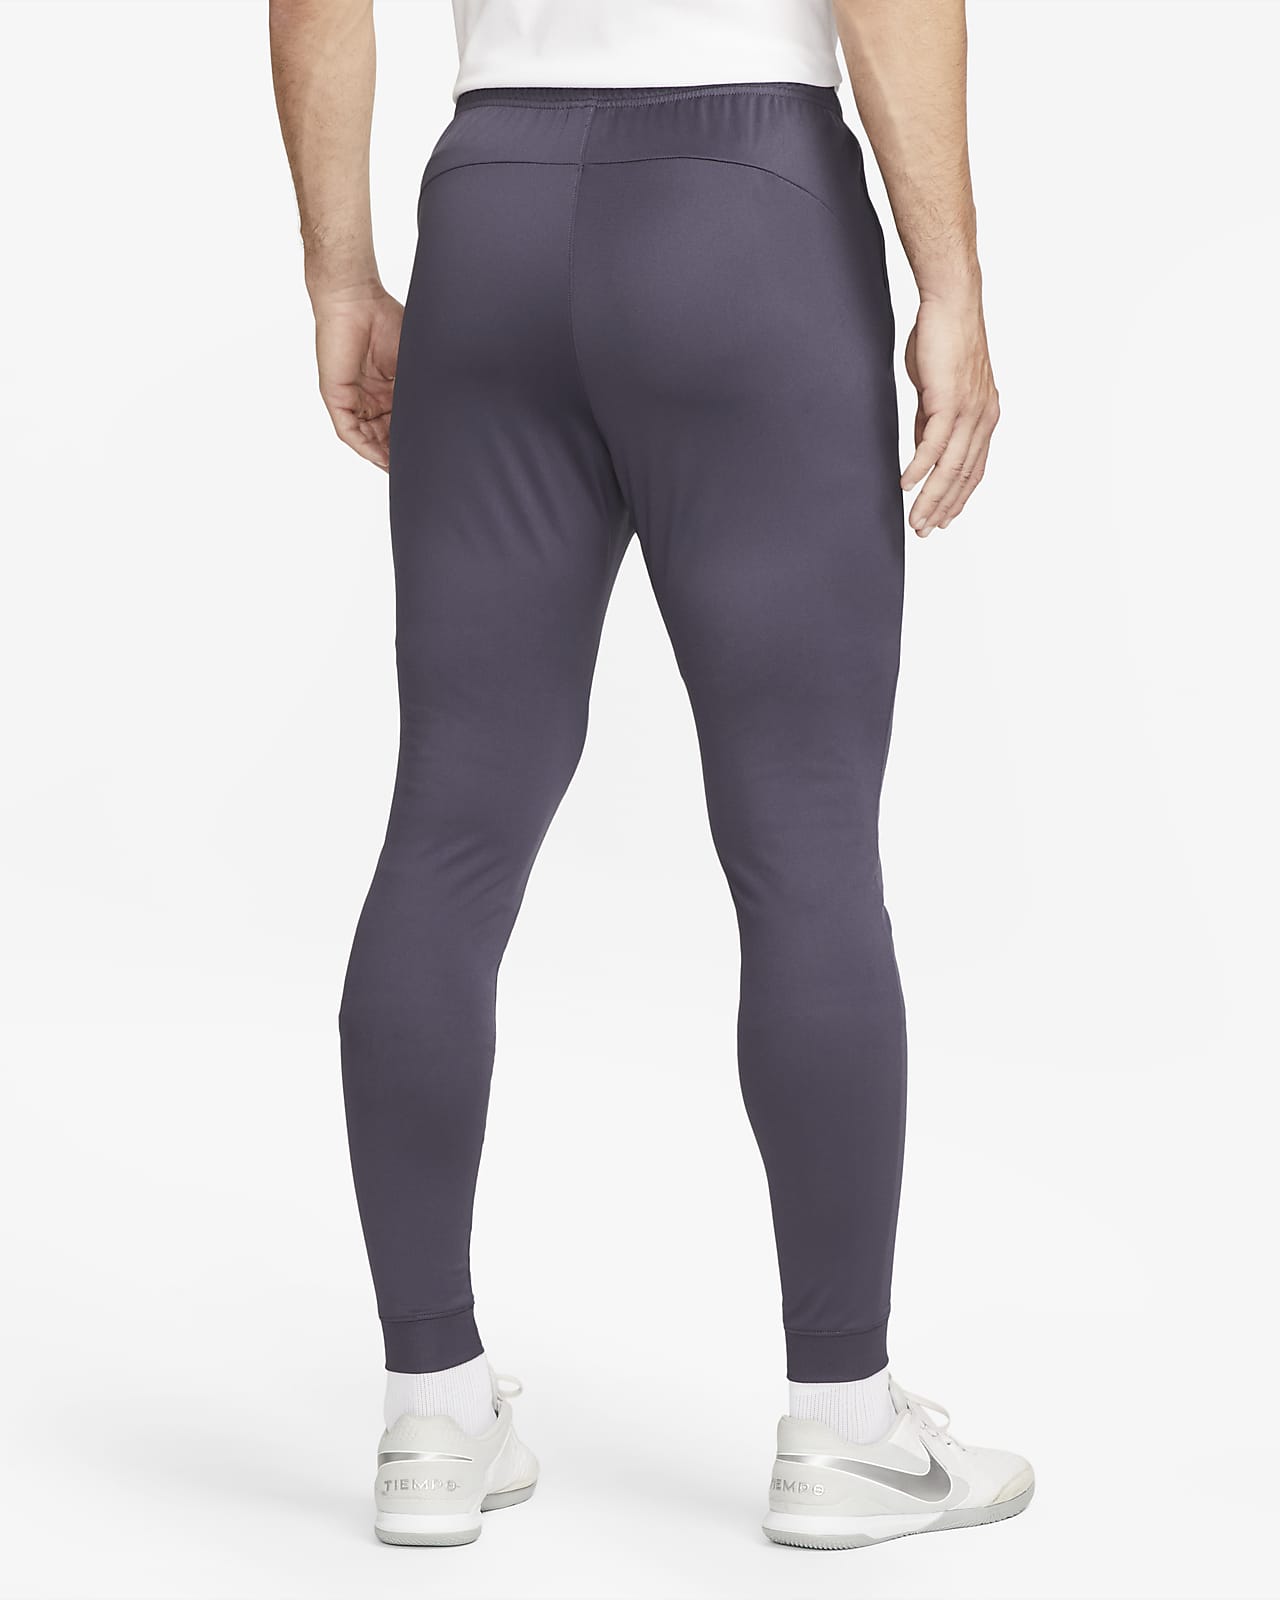 Men's White Trousers & Tights. Nike IL